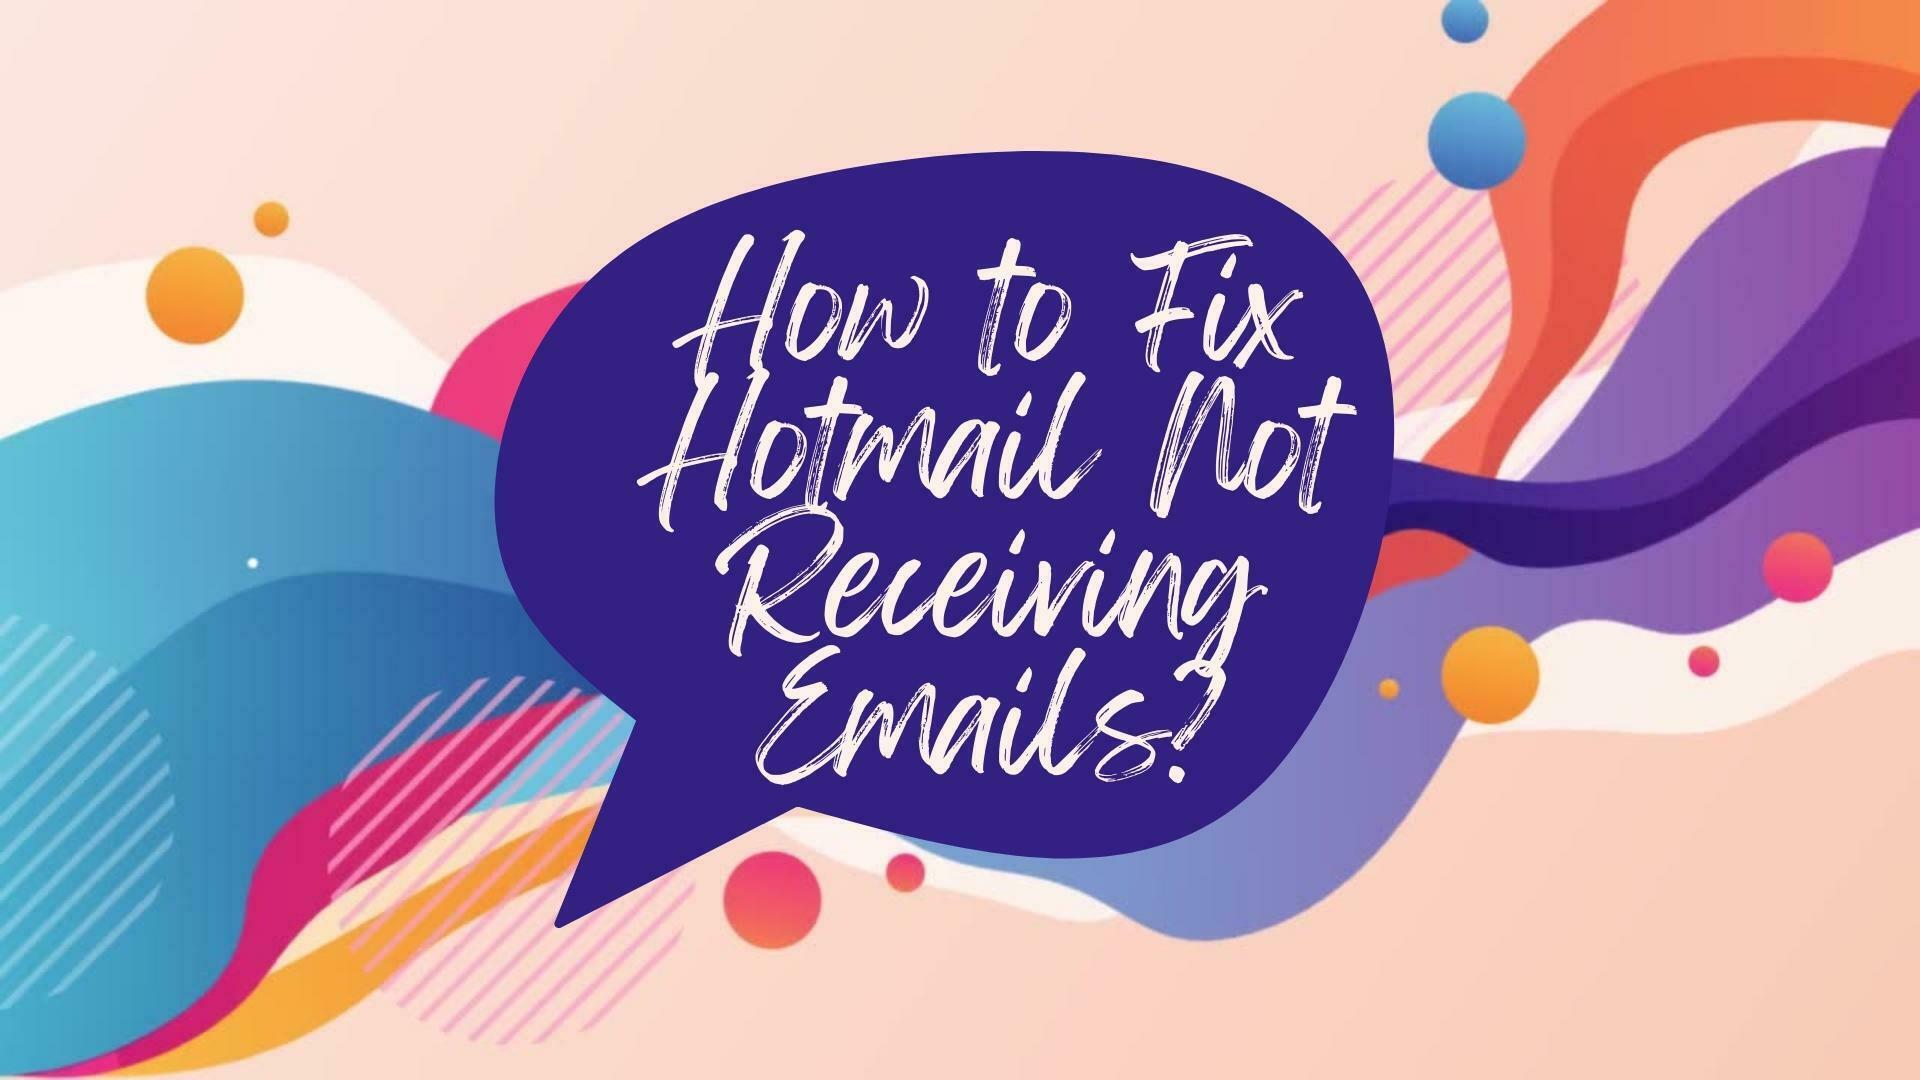 How to Fix Hotmail Not Receiving Emails?